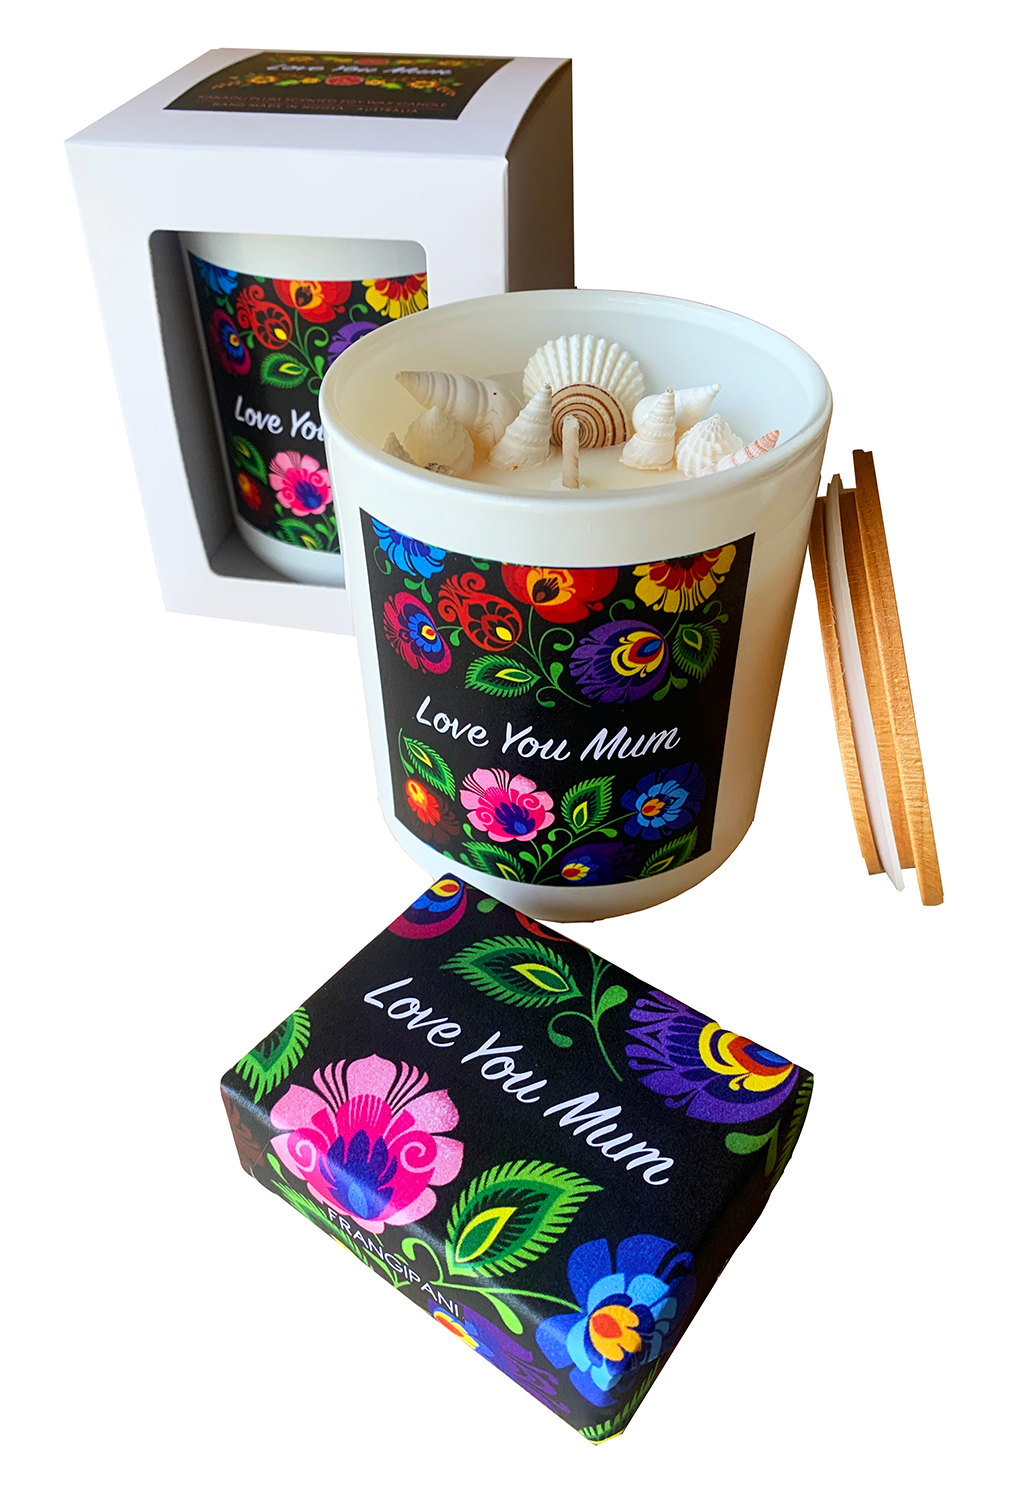 Hunter Gatherer / Pure soy wax shell candle / LOVE YOU MUM / Boxed